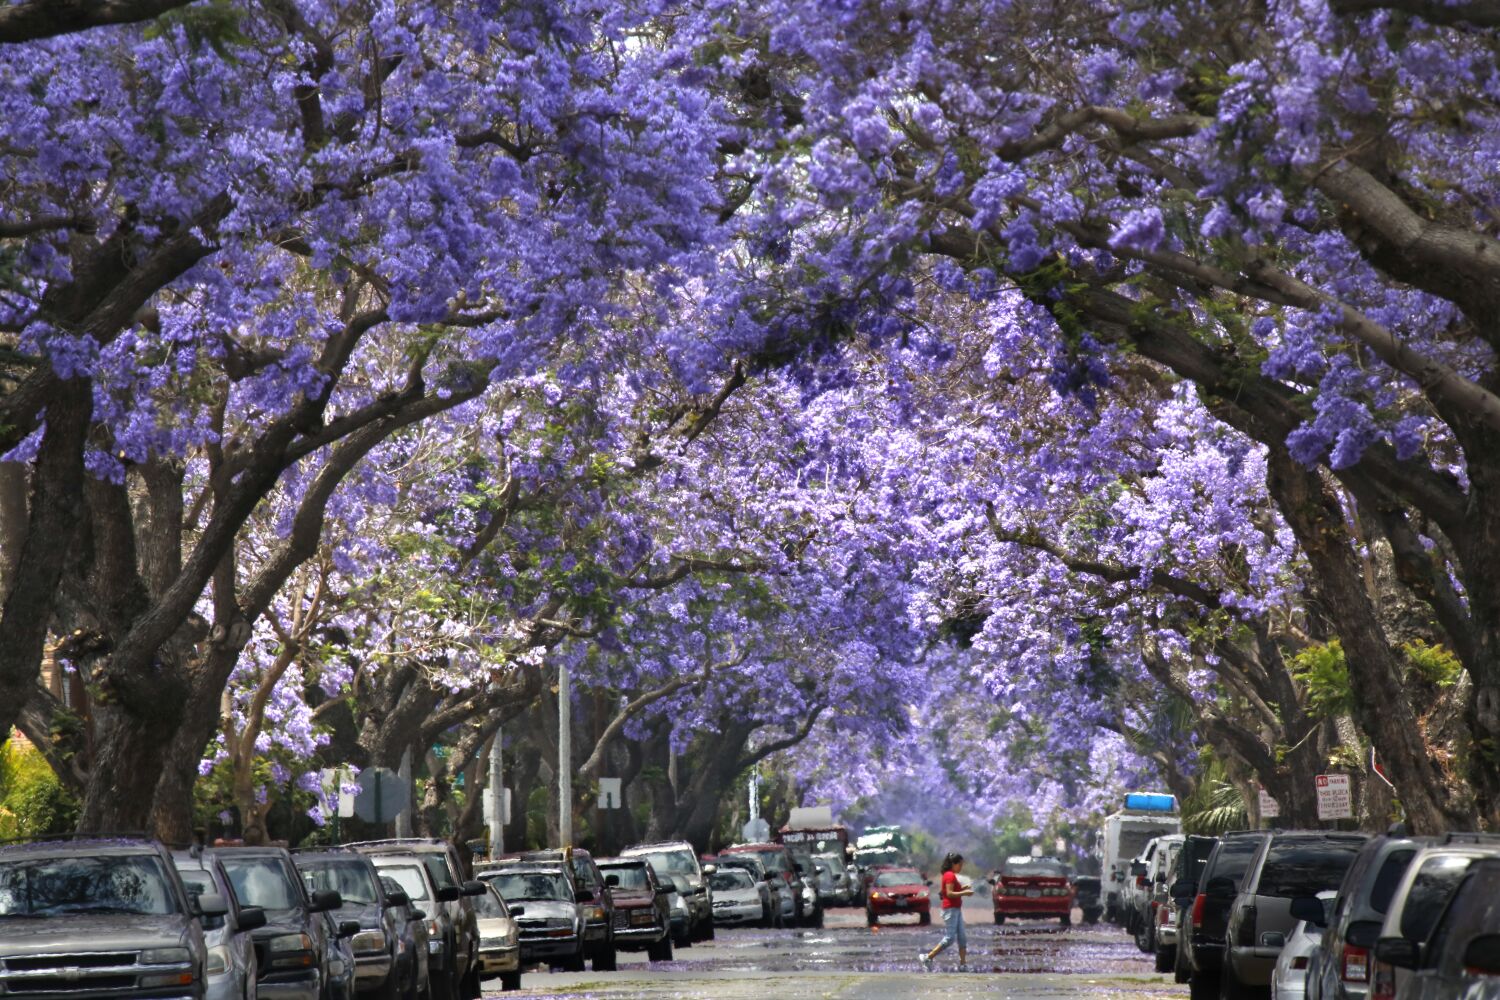 Why haven't all the jacarandas bloomed yet? When will purple reign again in L.A.?